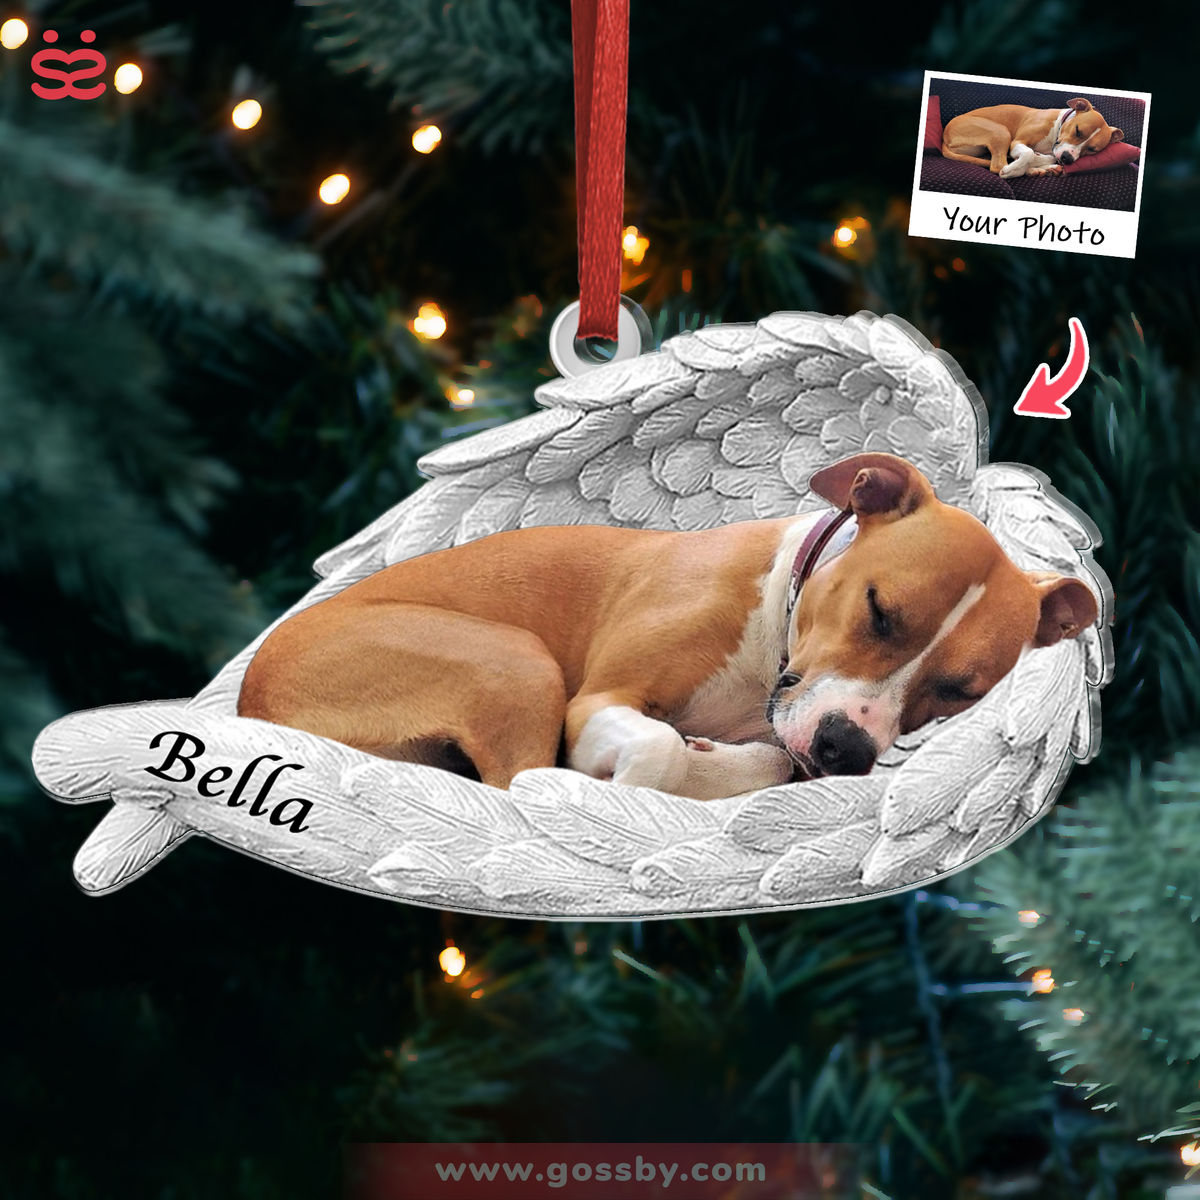 Dog Acrylic Ornament - Dog Lovers - Sleeping Pet Within Angel Wings - Customized Your Photo Ornament, Custom Photo Gifts, Christmas Gifts